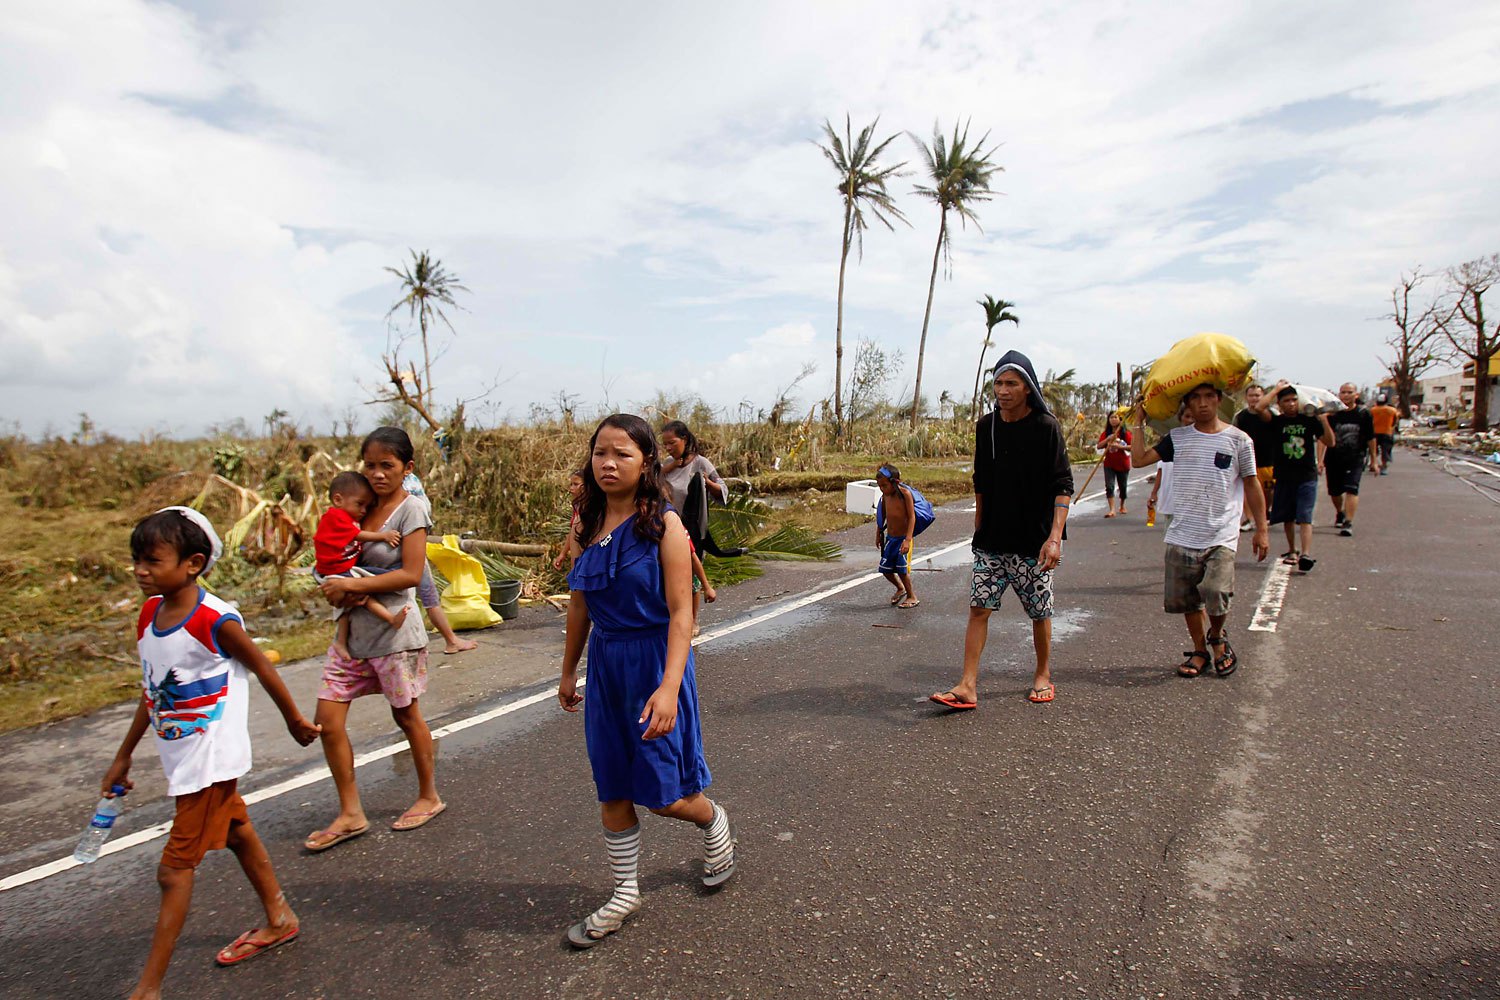 Survivors walk past a damaged town on Nov. 9, 2013, after strong winds brought by Supertyphoon Haiyan battered Tacloban, in central Philippines